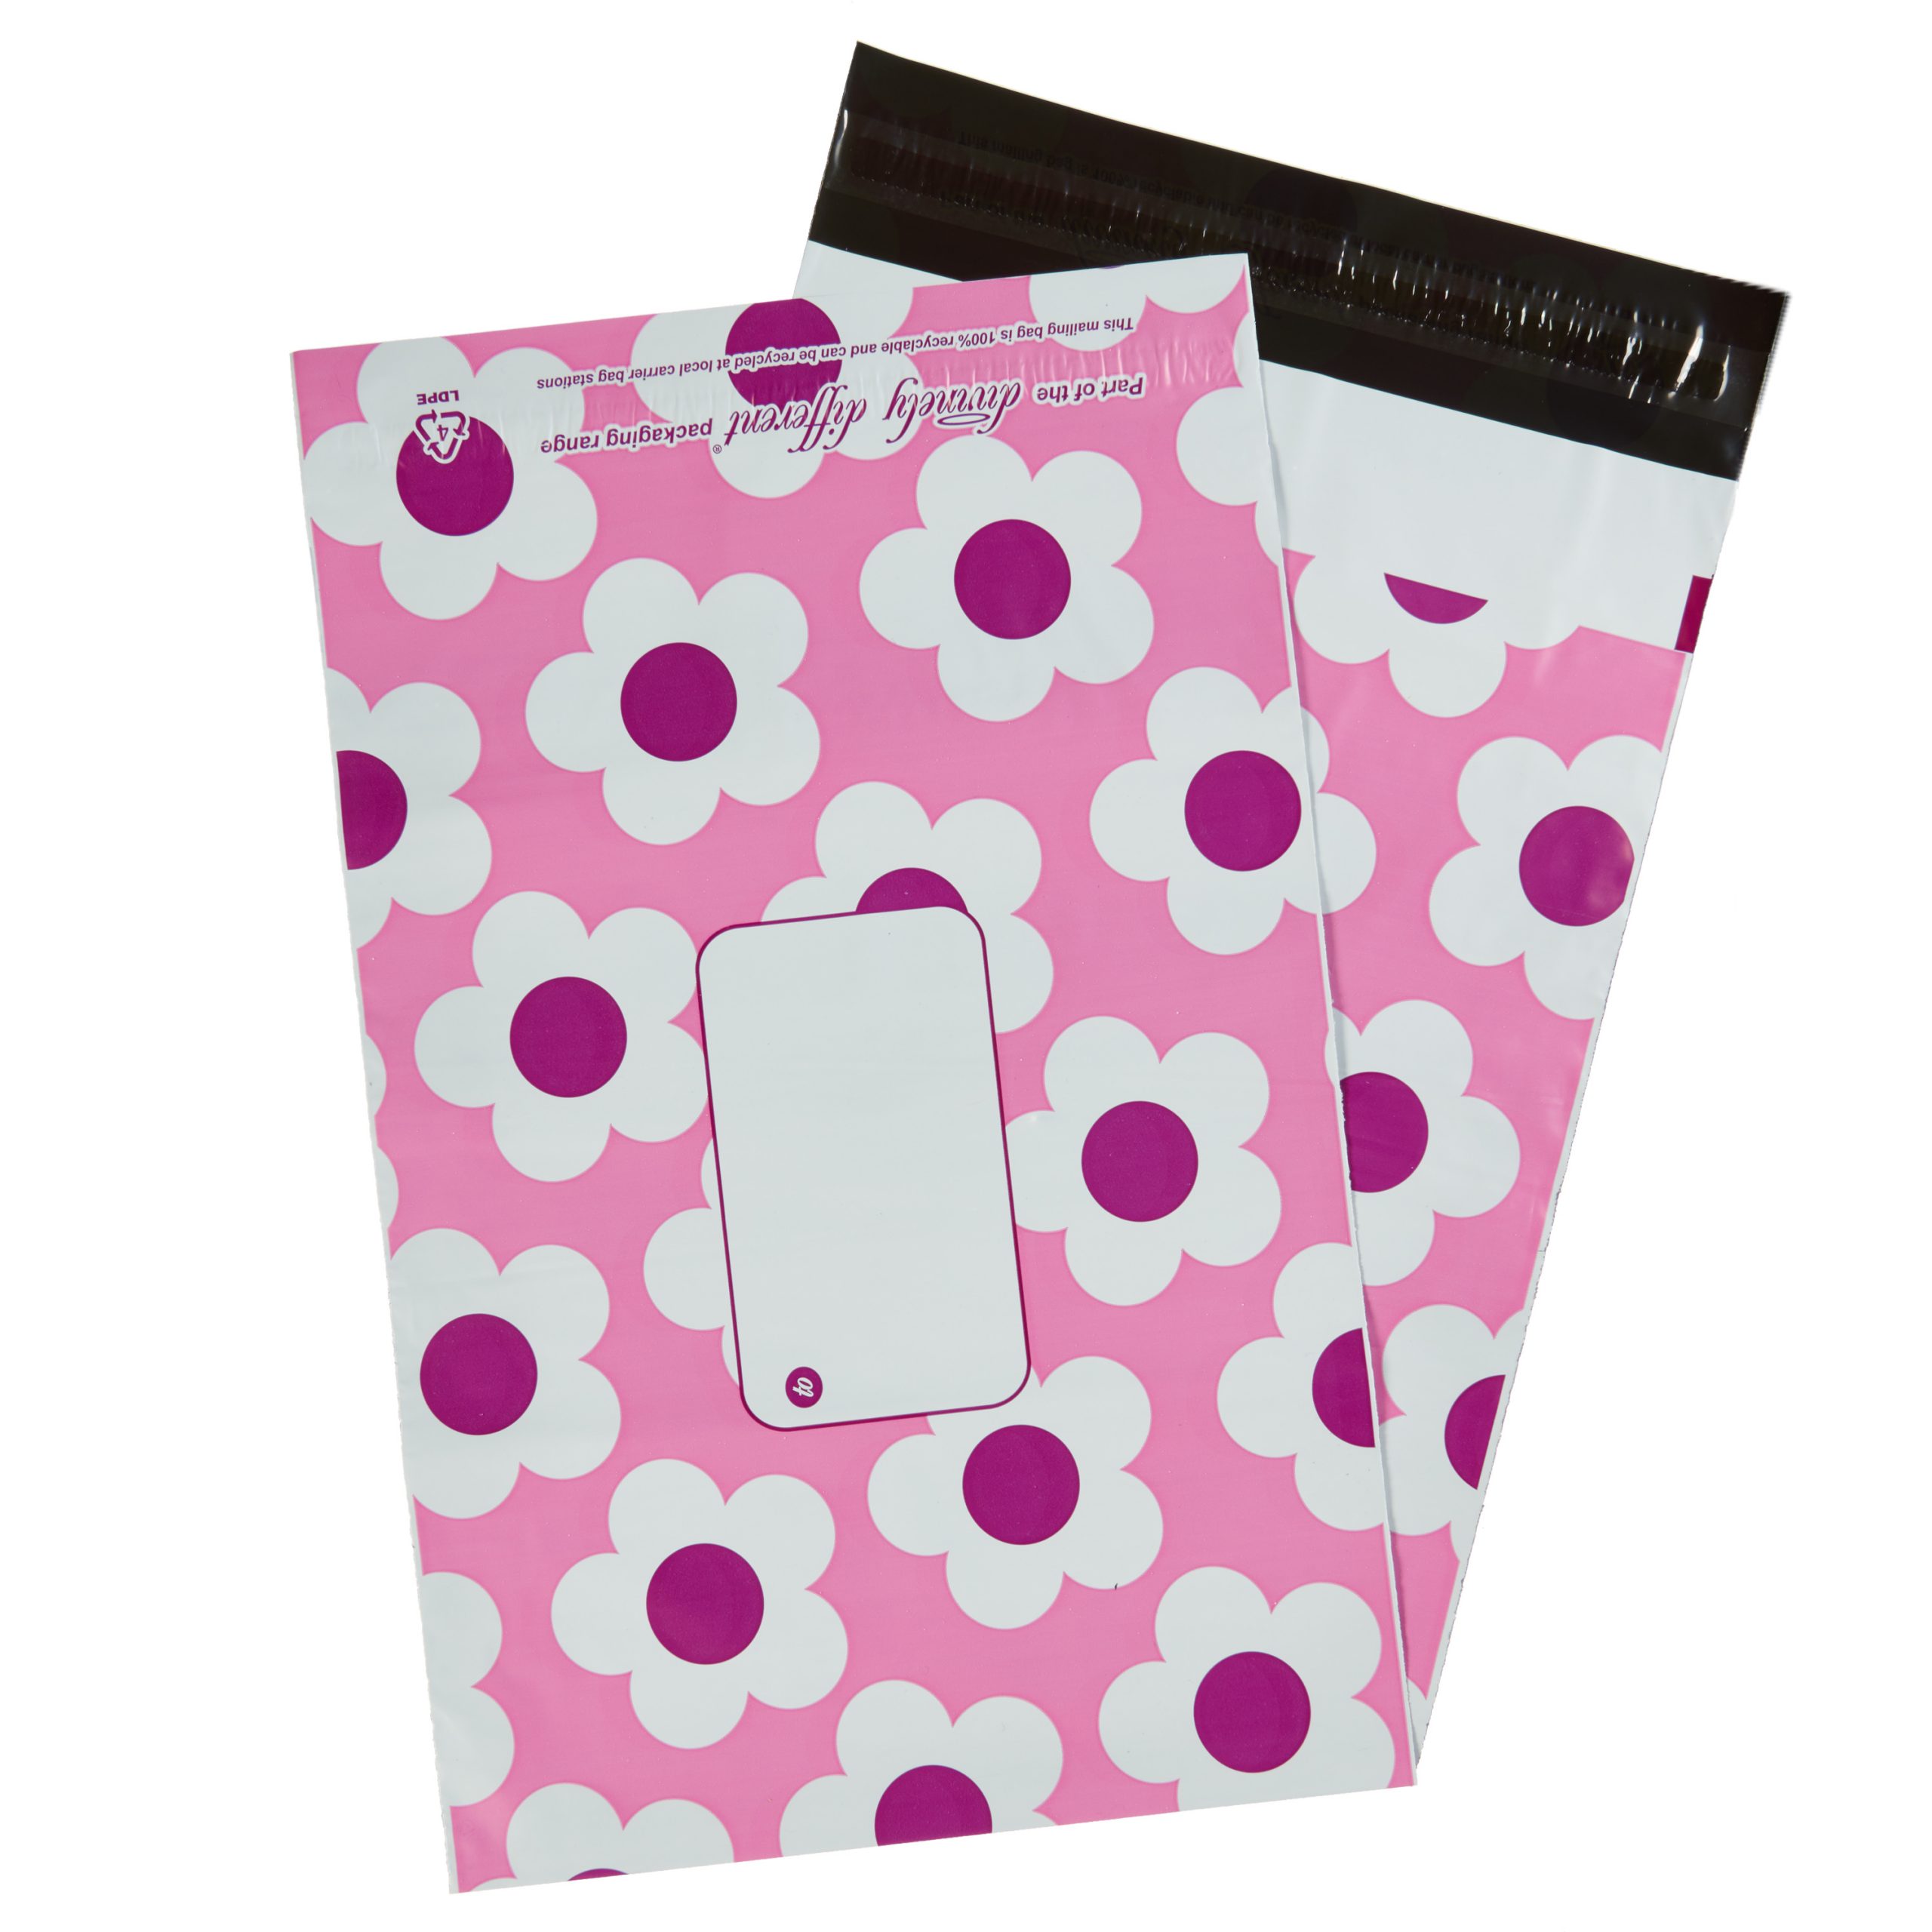 1000 Pink 6.5"x9" Mailing Postage Postal Mail Bags 